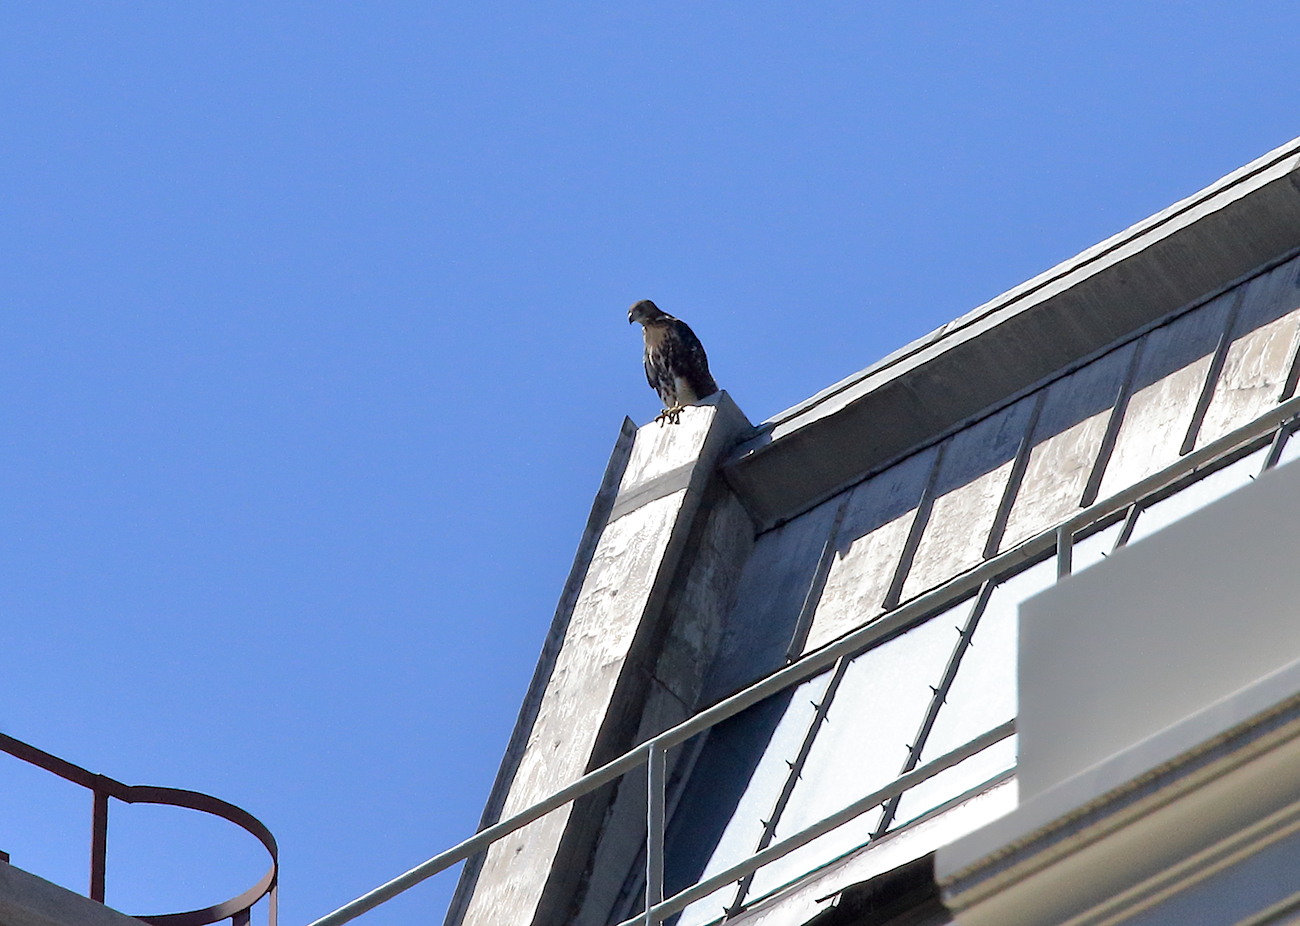 Red-tailed Hawk fledgling sitting on an NYU building, Washington Square Park (NYC)